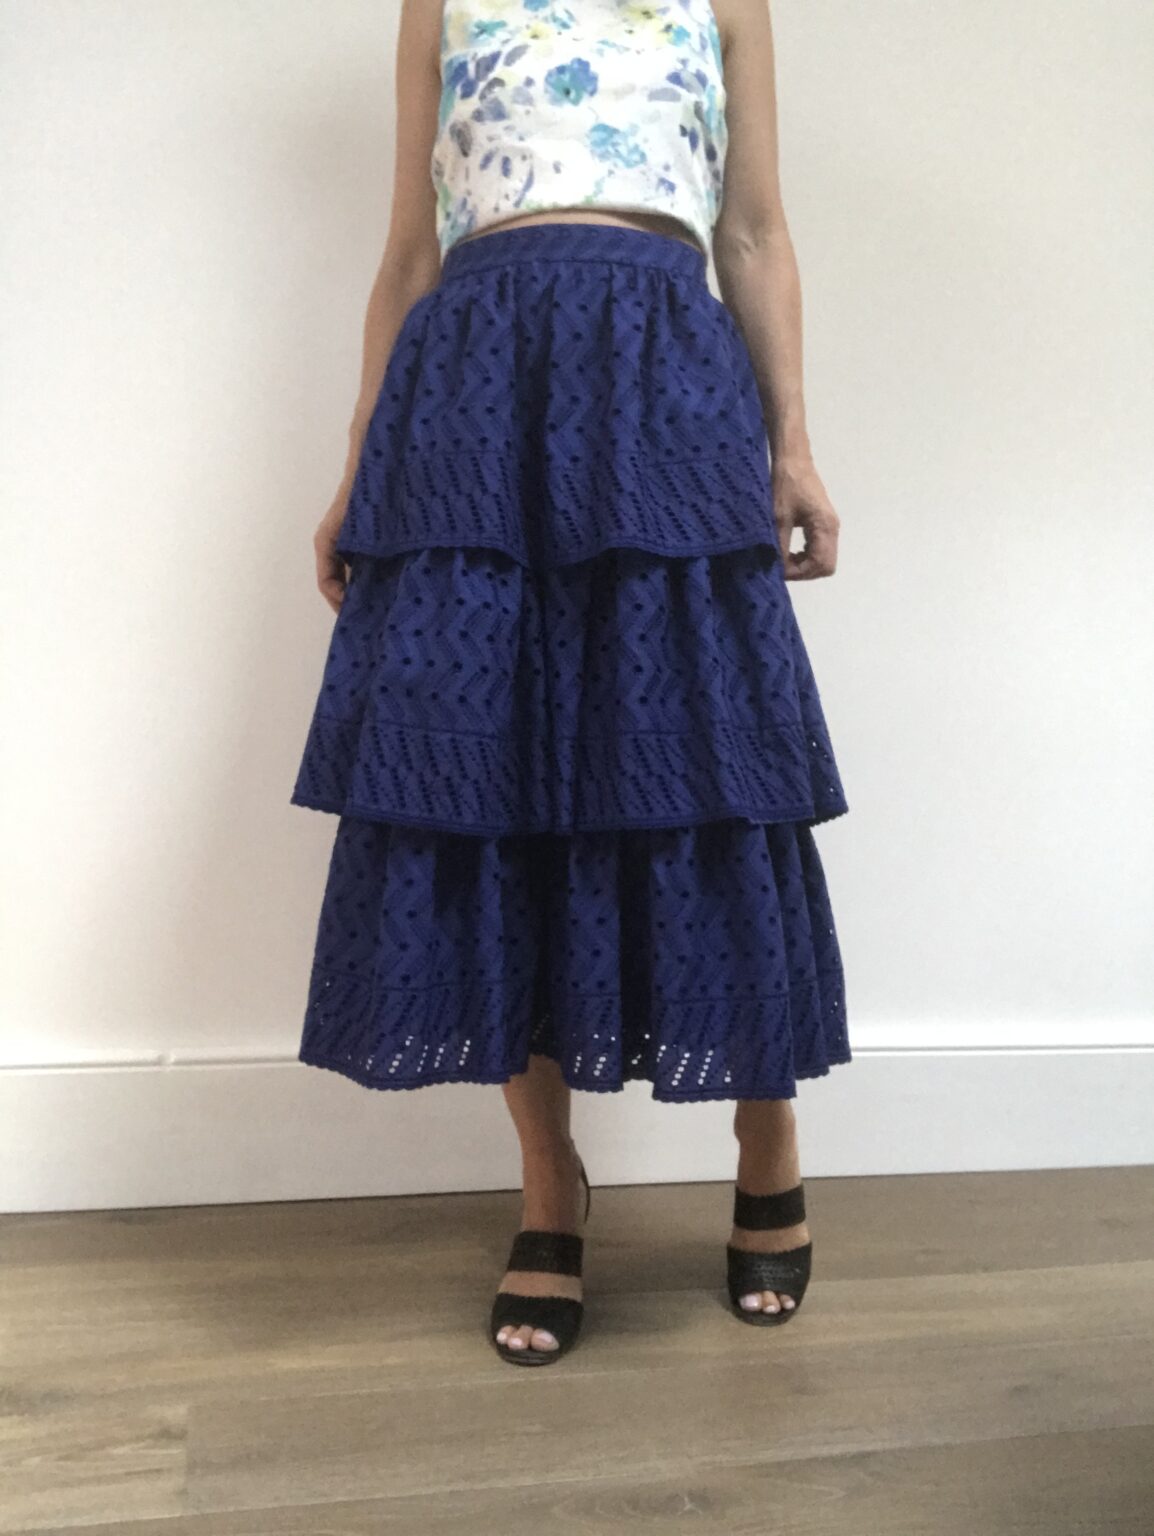 Tutorial: sewing a Zimmermann-like tiered ruffle skirt - Six Mignons